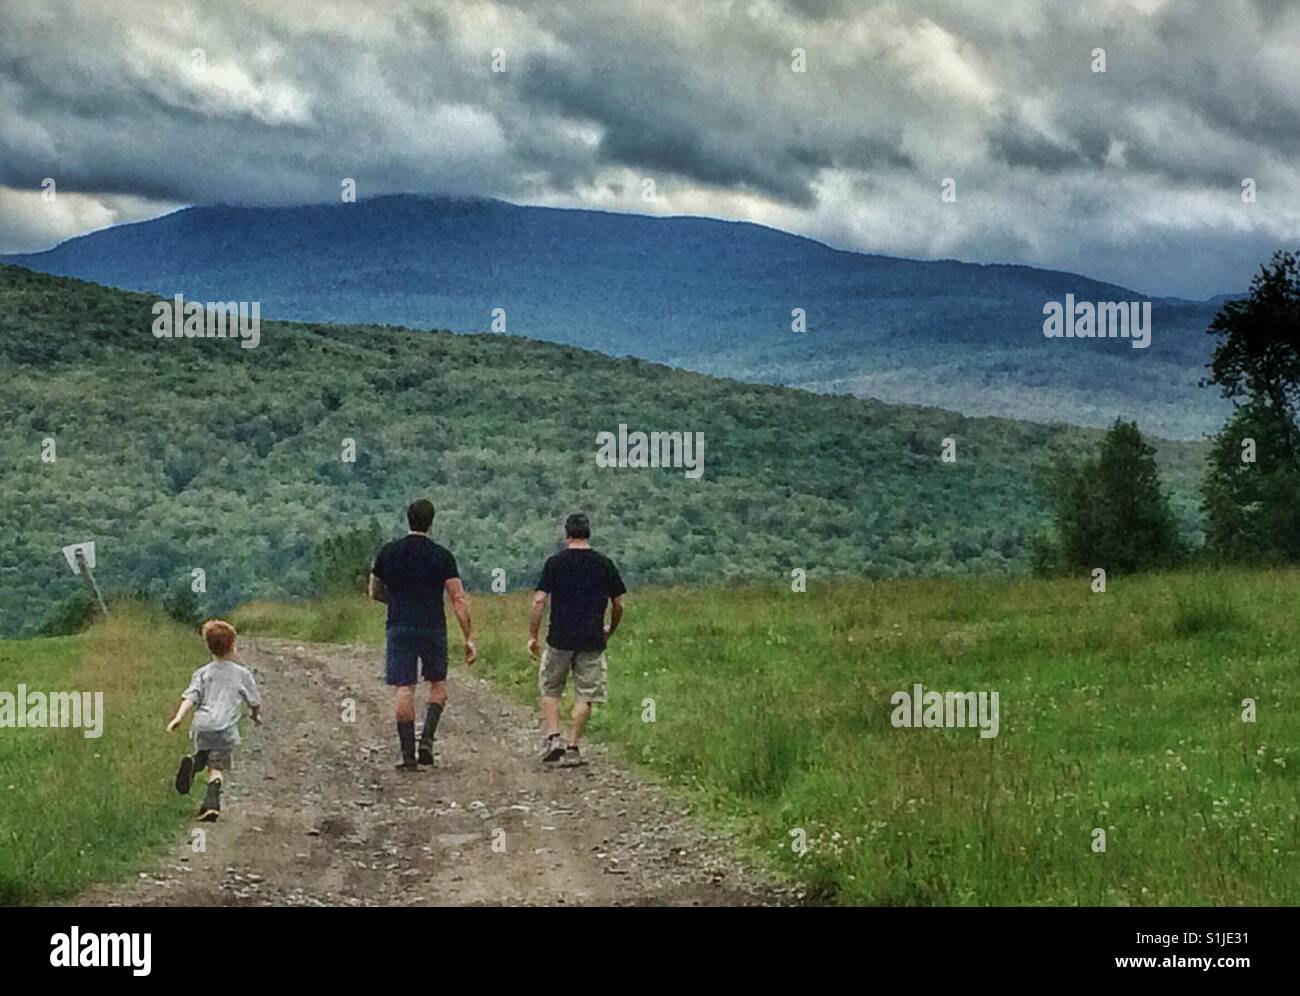 Family walking in countryside, Quebec. Stock Photo